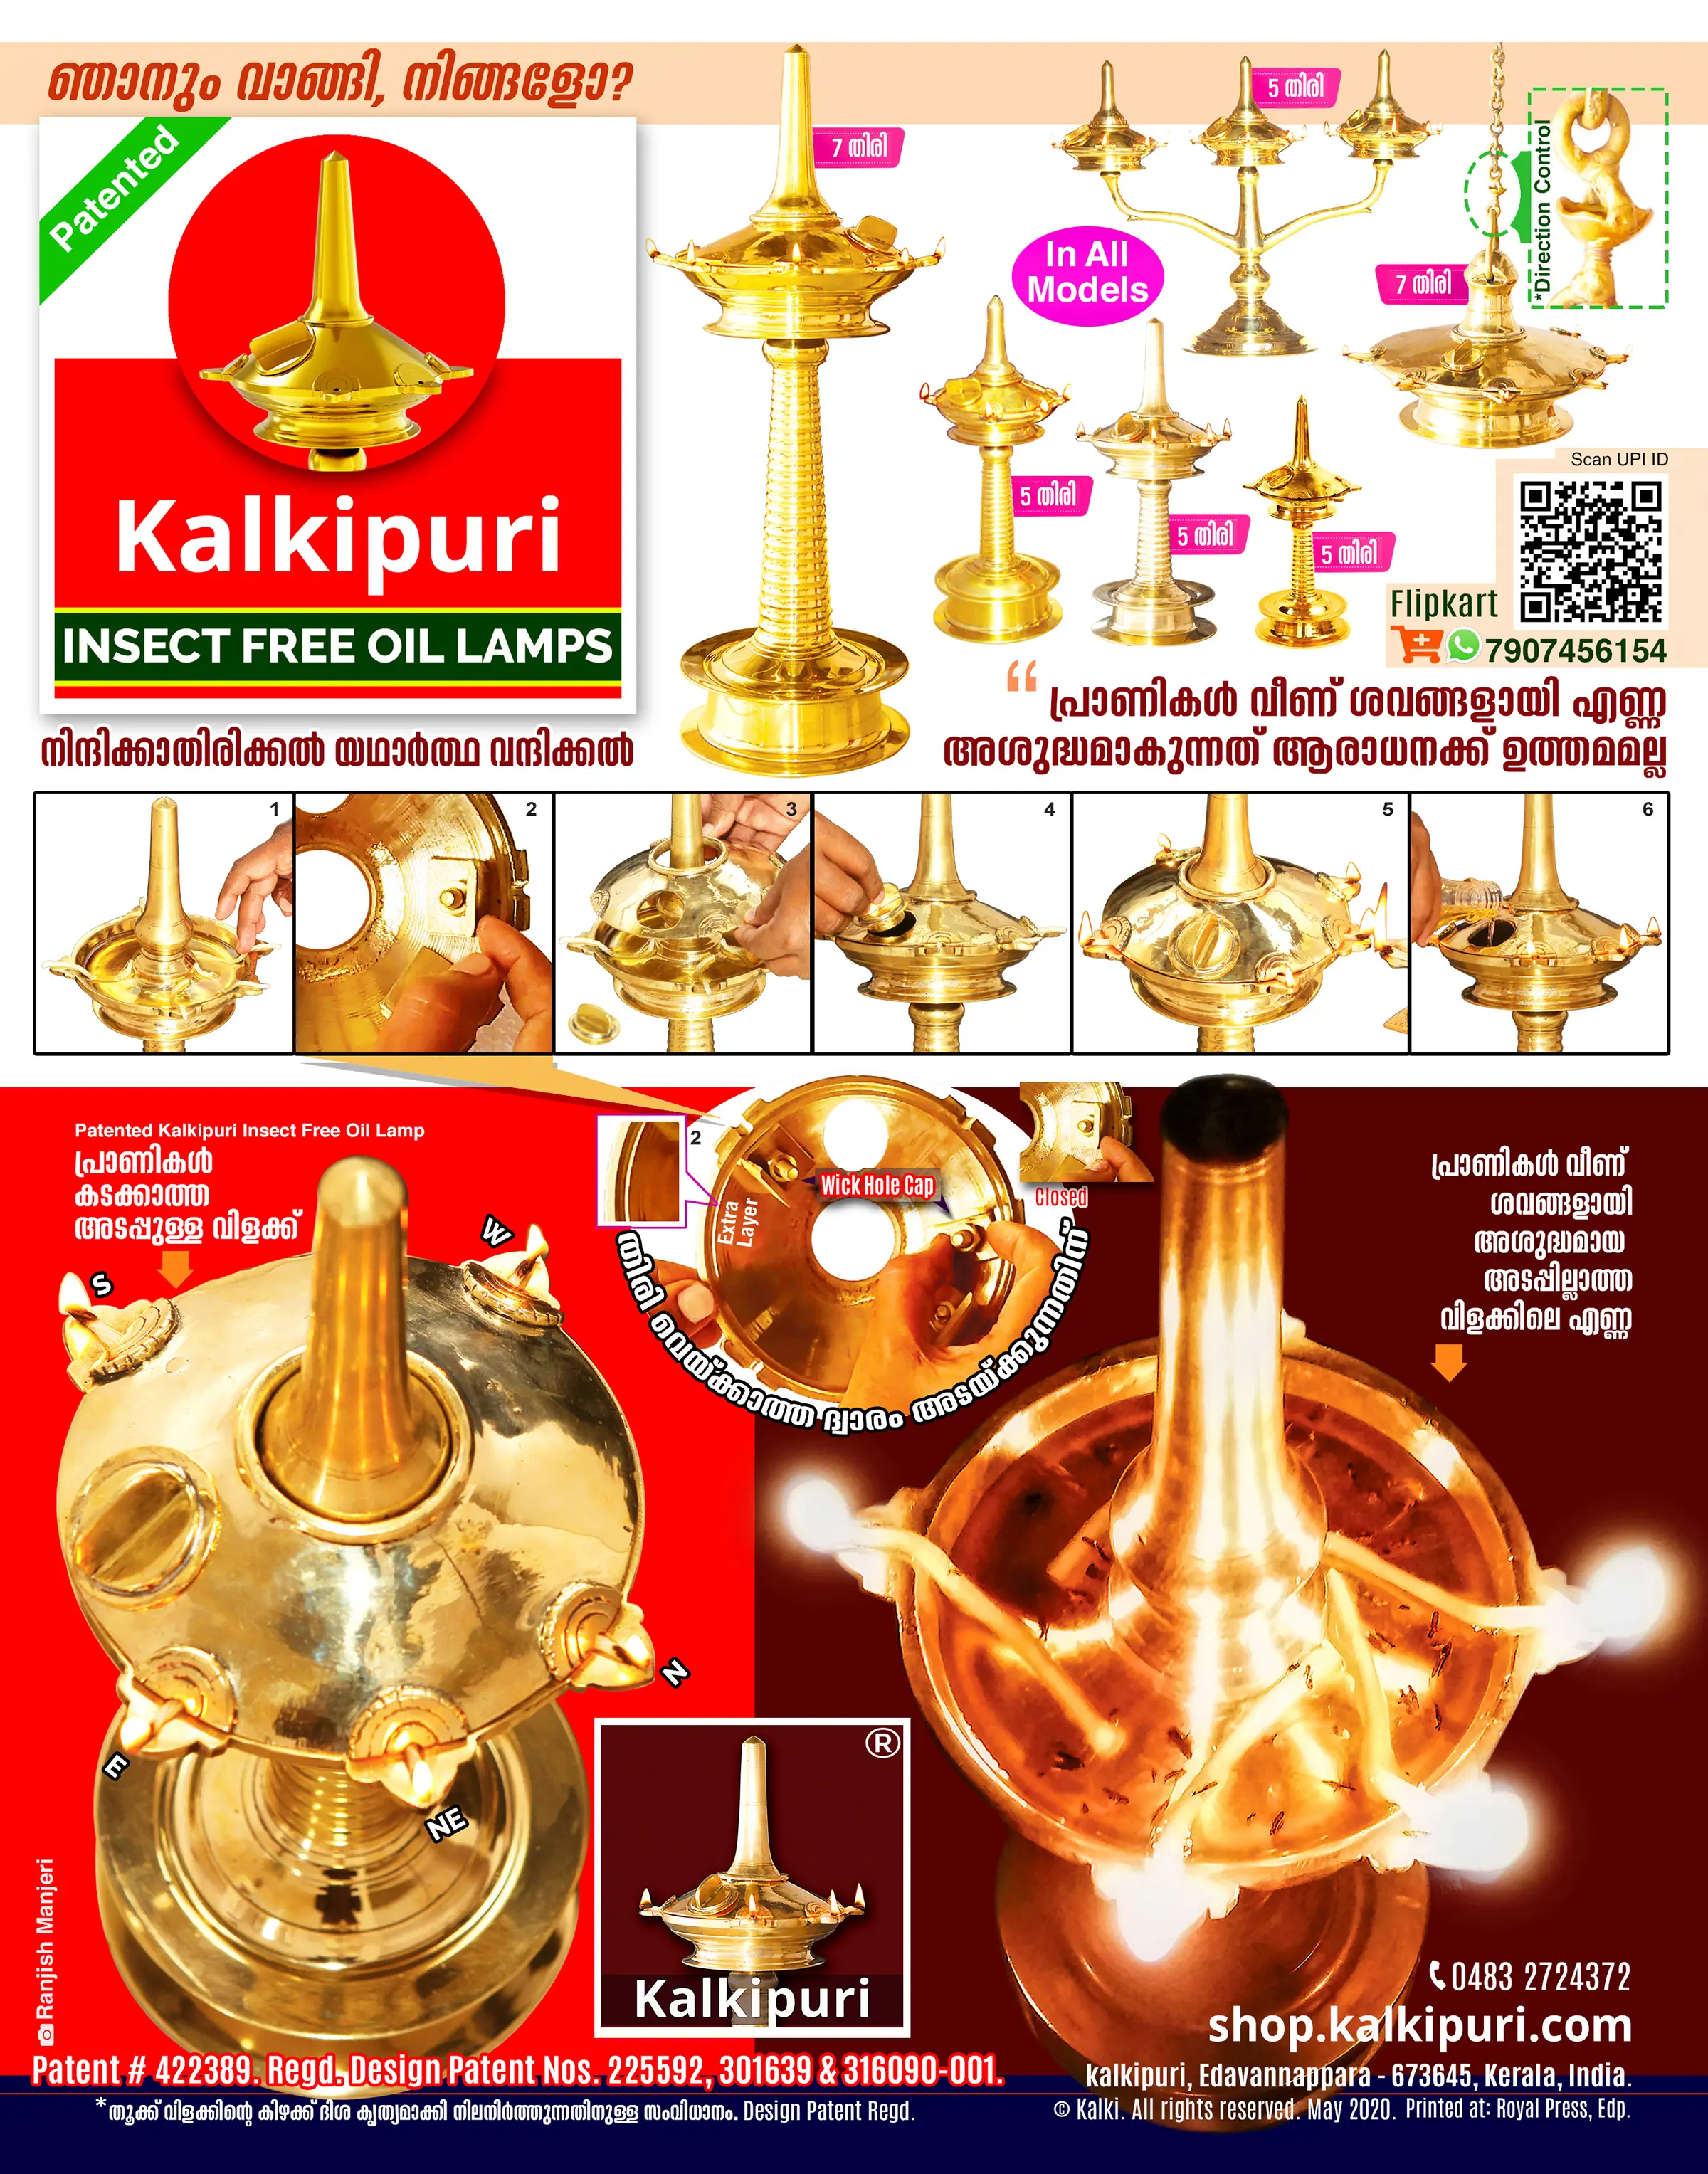 Kalkipuri Products Patented Insect Free Oil Lamps ml